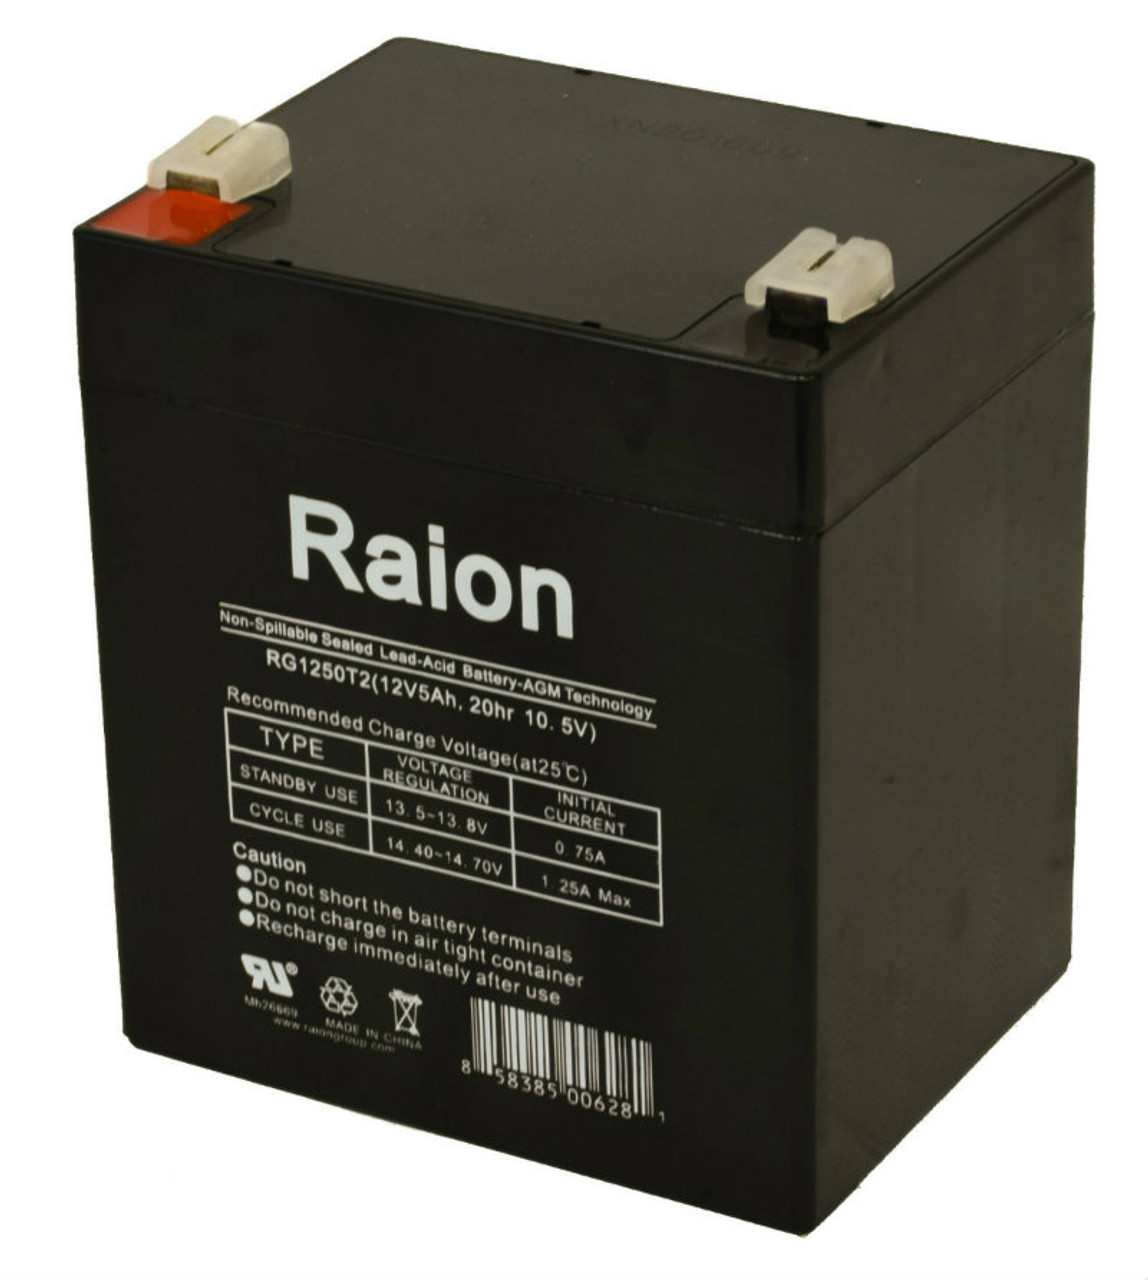 Raion Power RG1250T1 Replacement Fire Alarm Control Panel Battery for ACME Security System EP1245